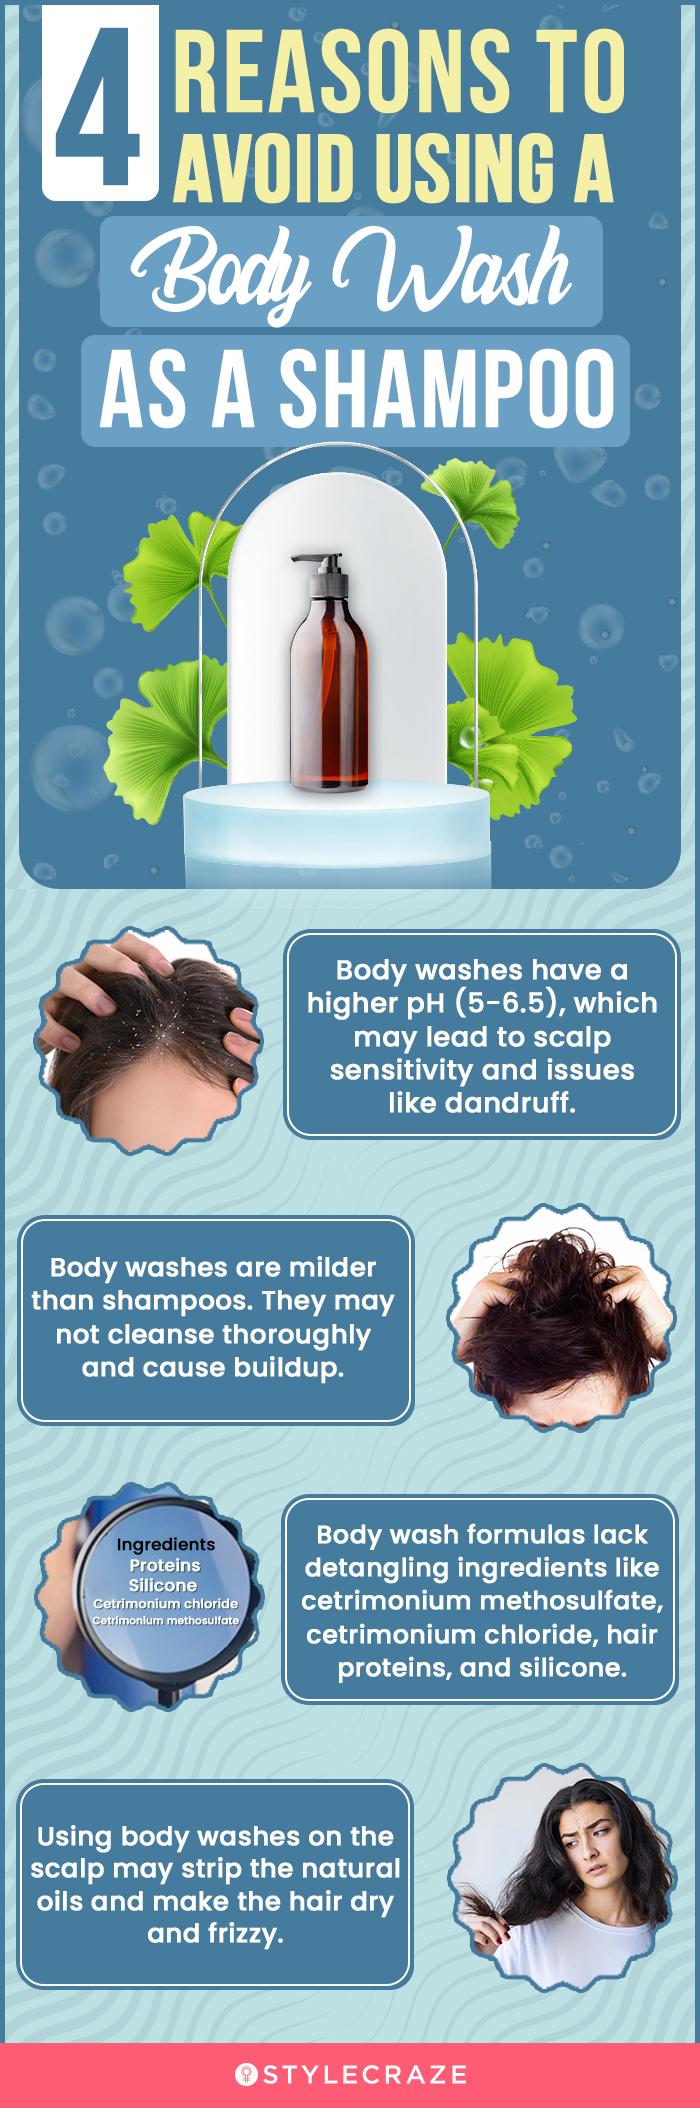 4 reasons to avoid using a body wash as a shampoo (infographic)